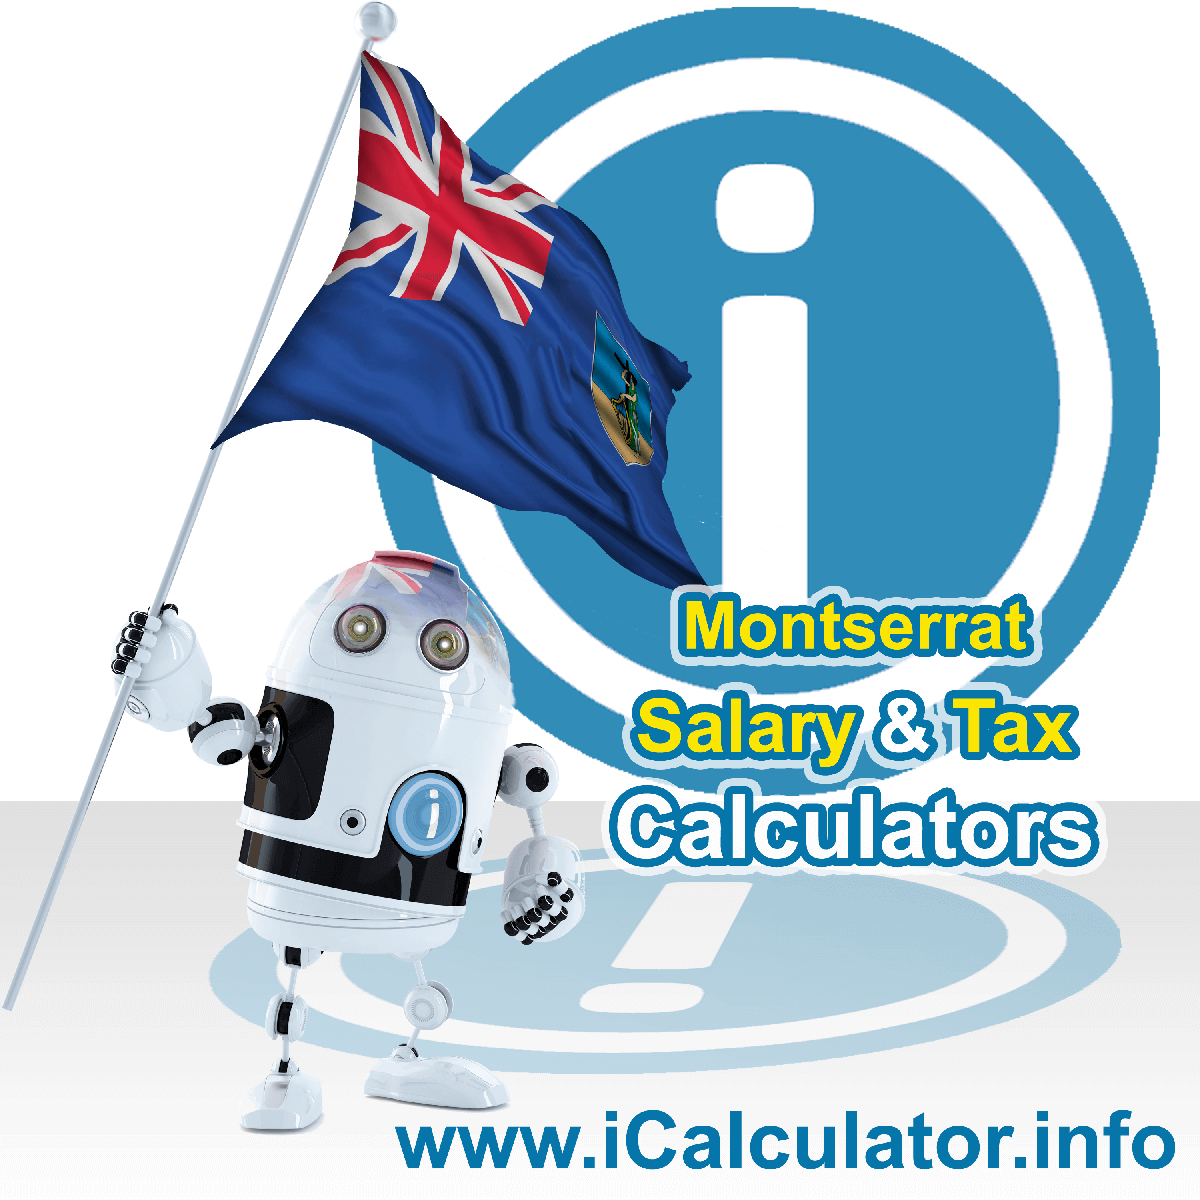 Montserrat Tax Calculator. This image shows the Montserrat flag and information relating to the tax formula for the Montserrat Salary Calculator